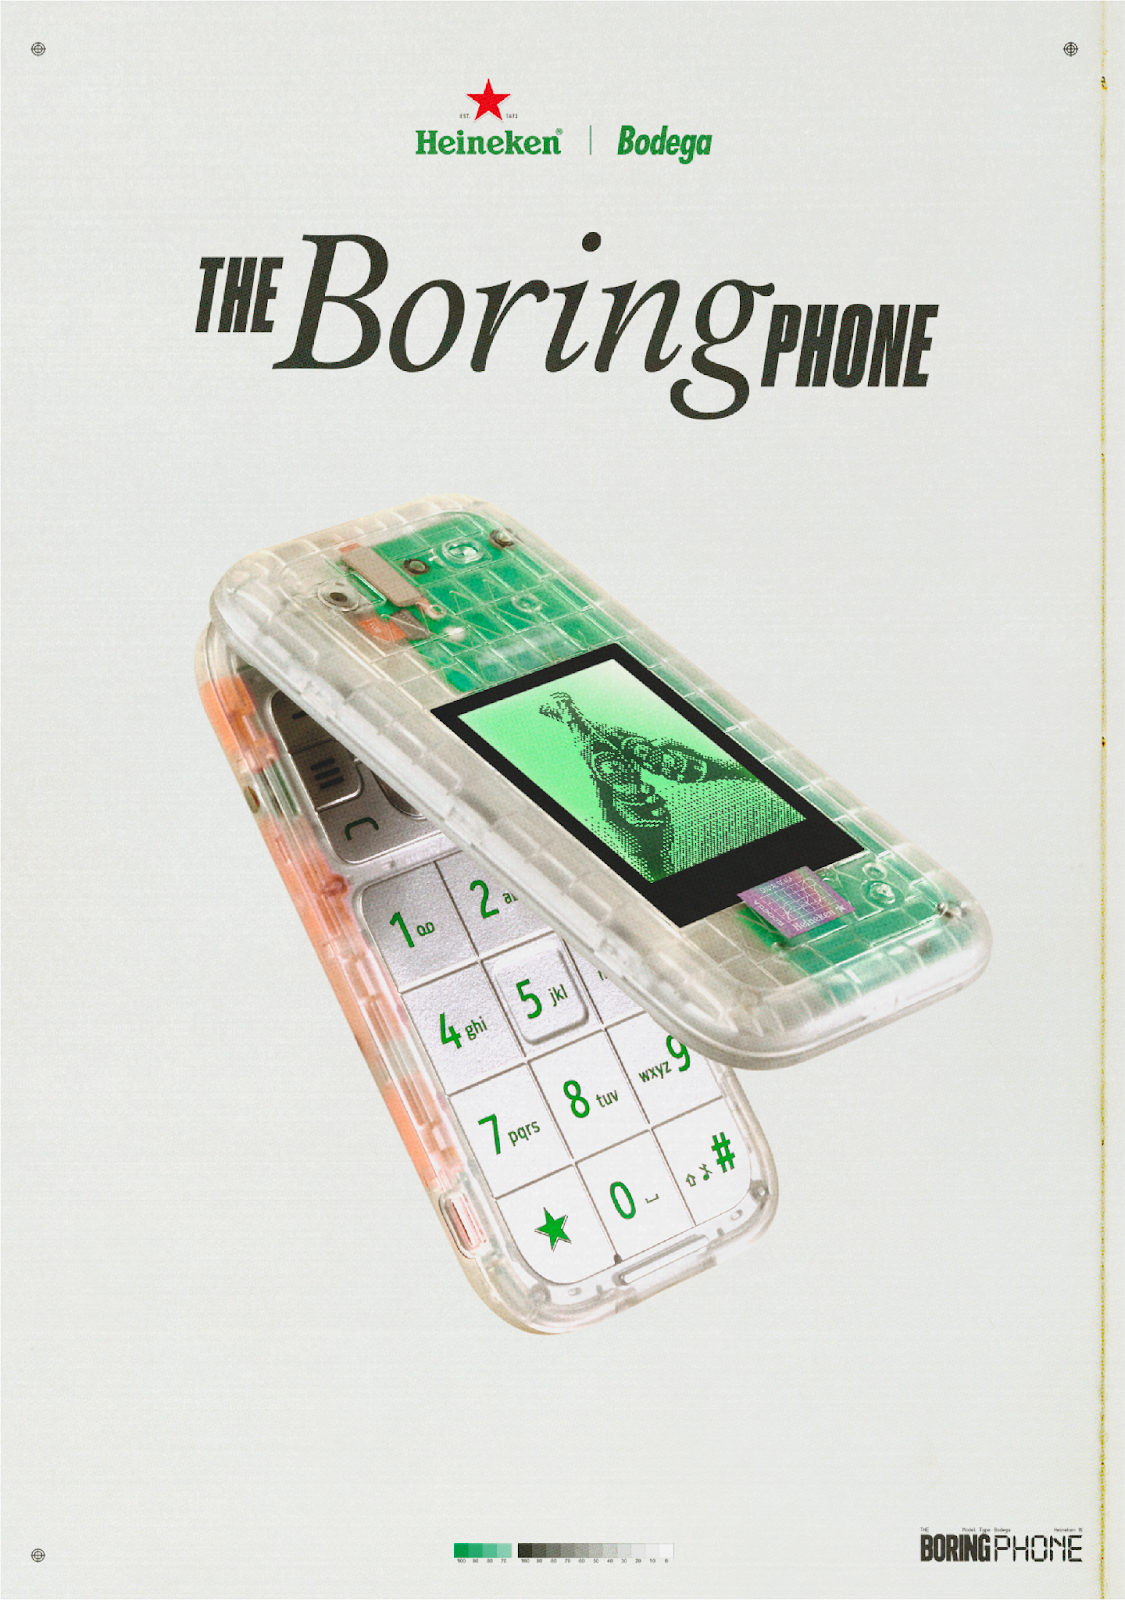 Heineken® and Bodega have launched 'The Boring Phone', to help people discover there is more to their social life when there is less on their phone